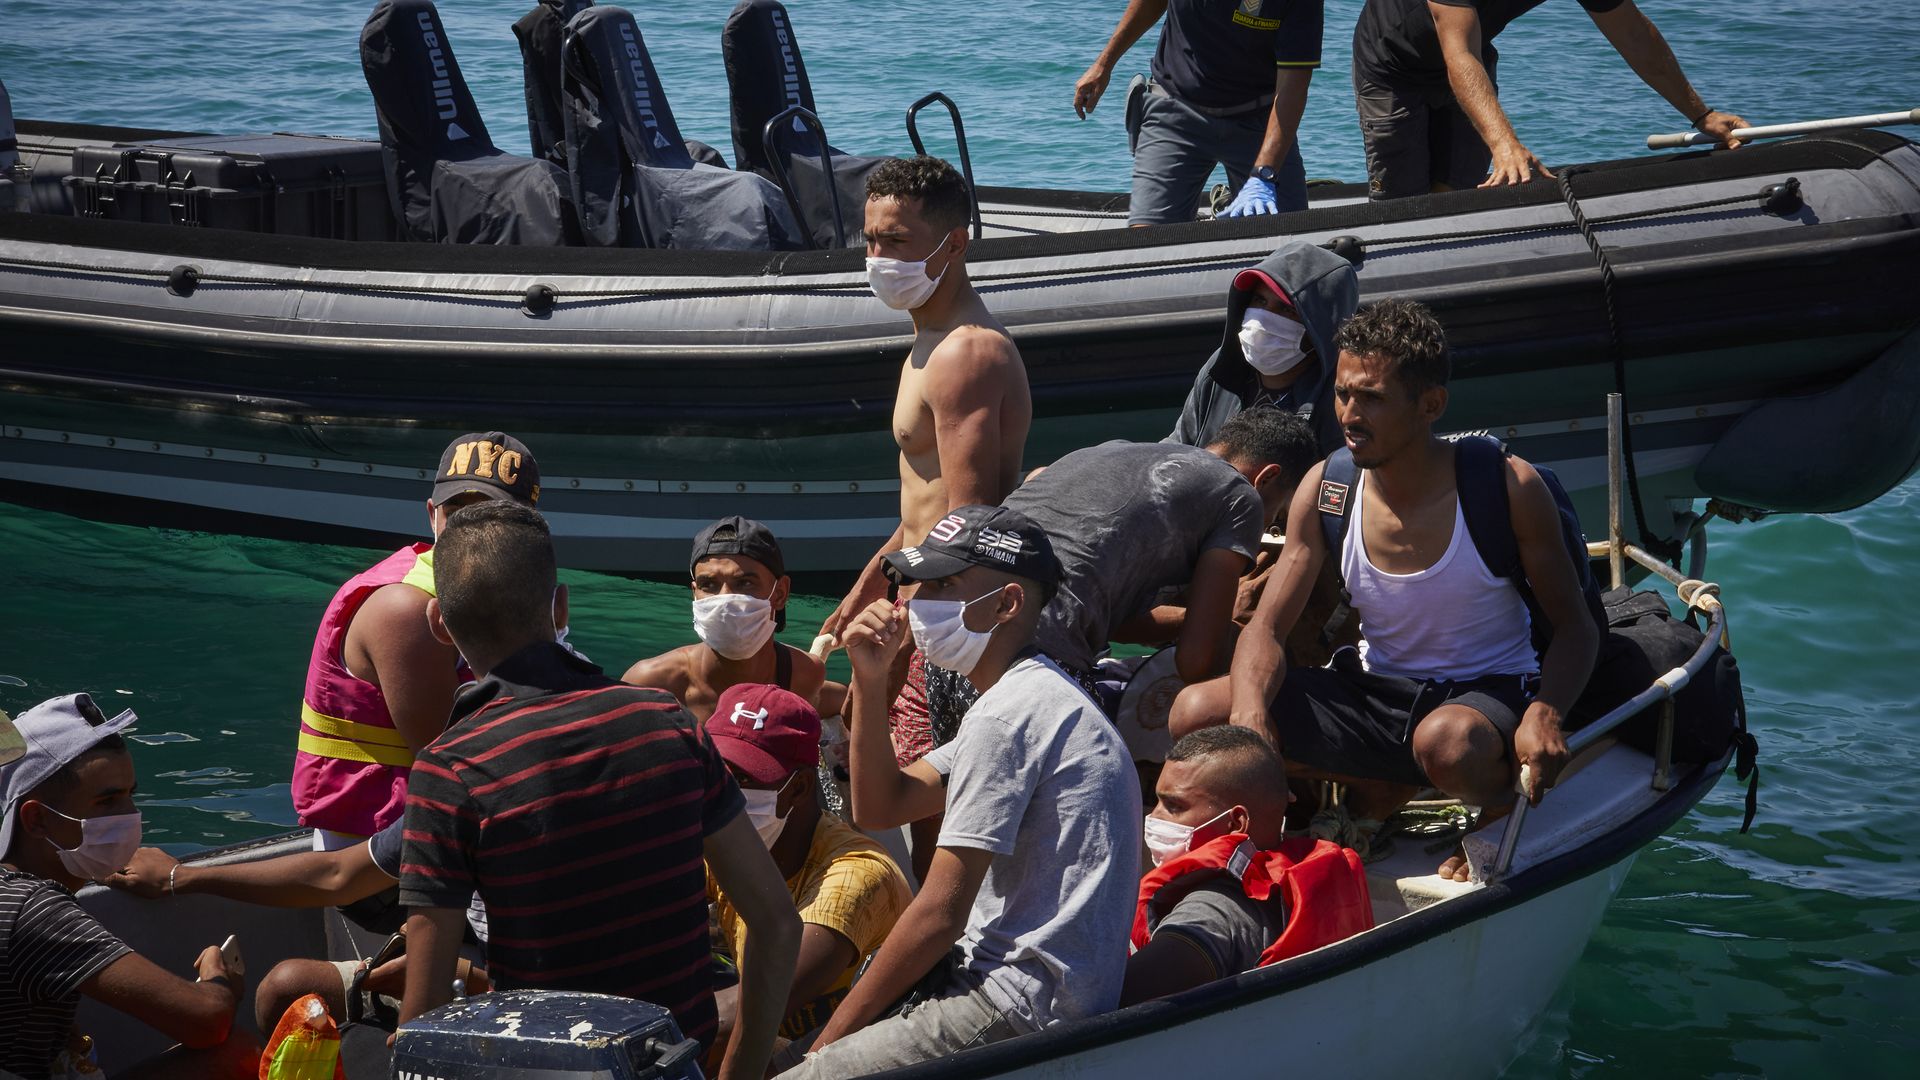  A group of migrants wait in their boat before being checked by medical staff on August 28, 2020 in Lampedusa, Italy.